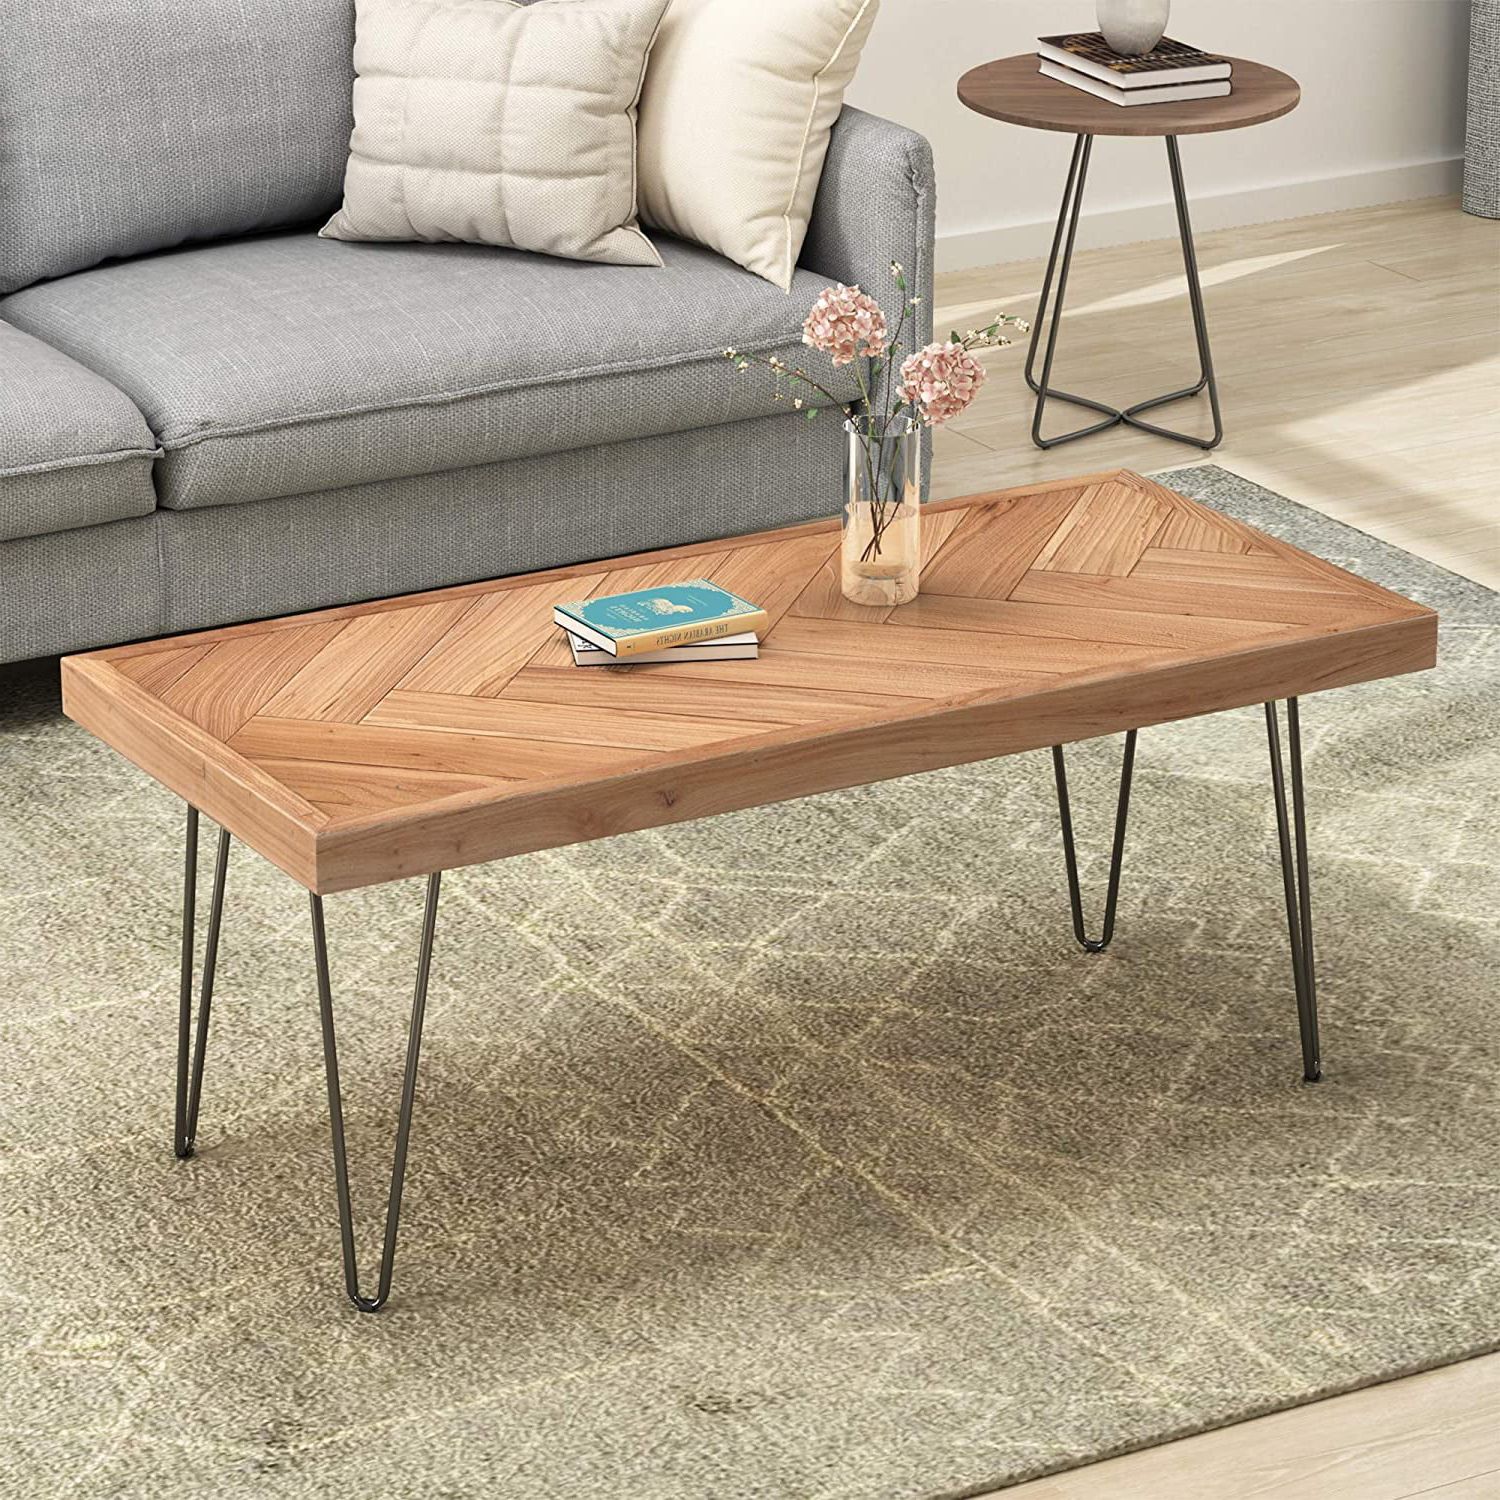 Modern Wood Coffee Table, Nature Cocktail Table For Living Room Chevron Inside Coffee Tables With Solid Legs (View 16 of 20)